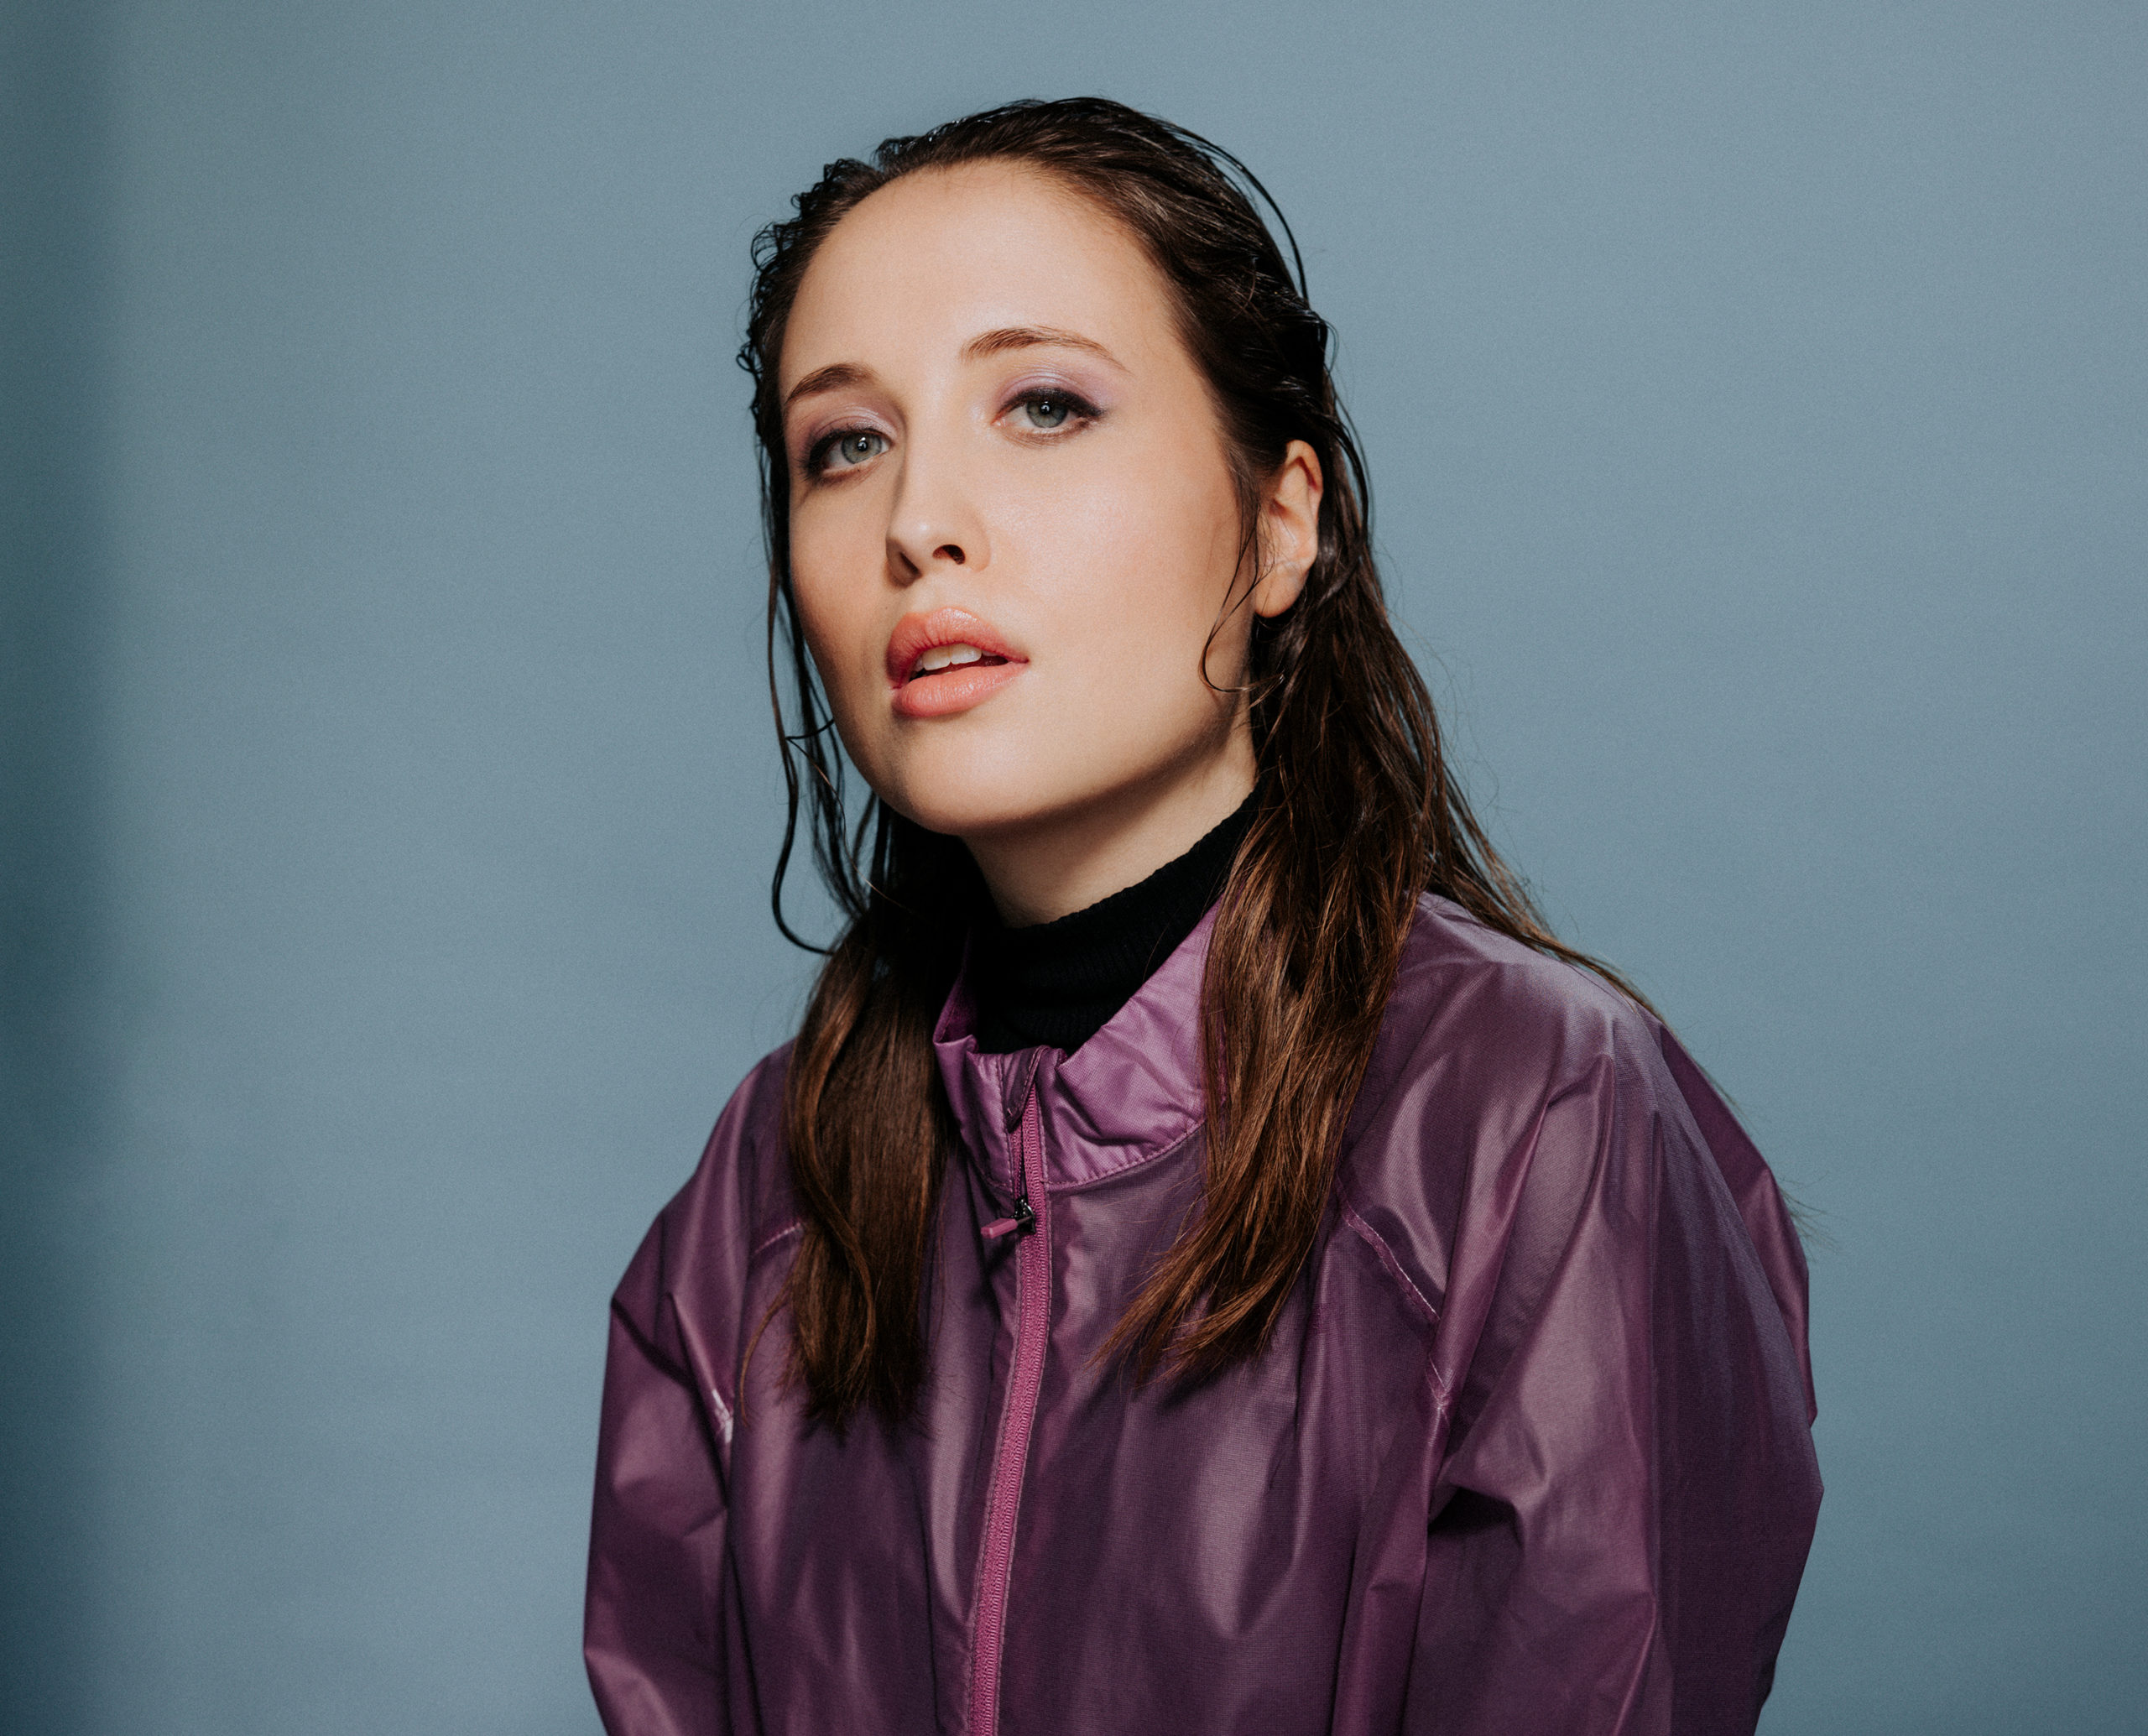 Give Me The Future Tour 2022 with Alice Merton Image